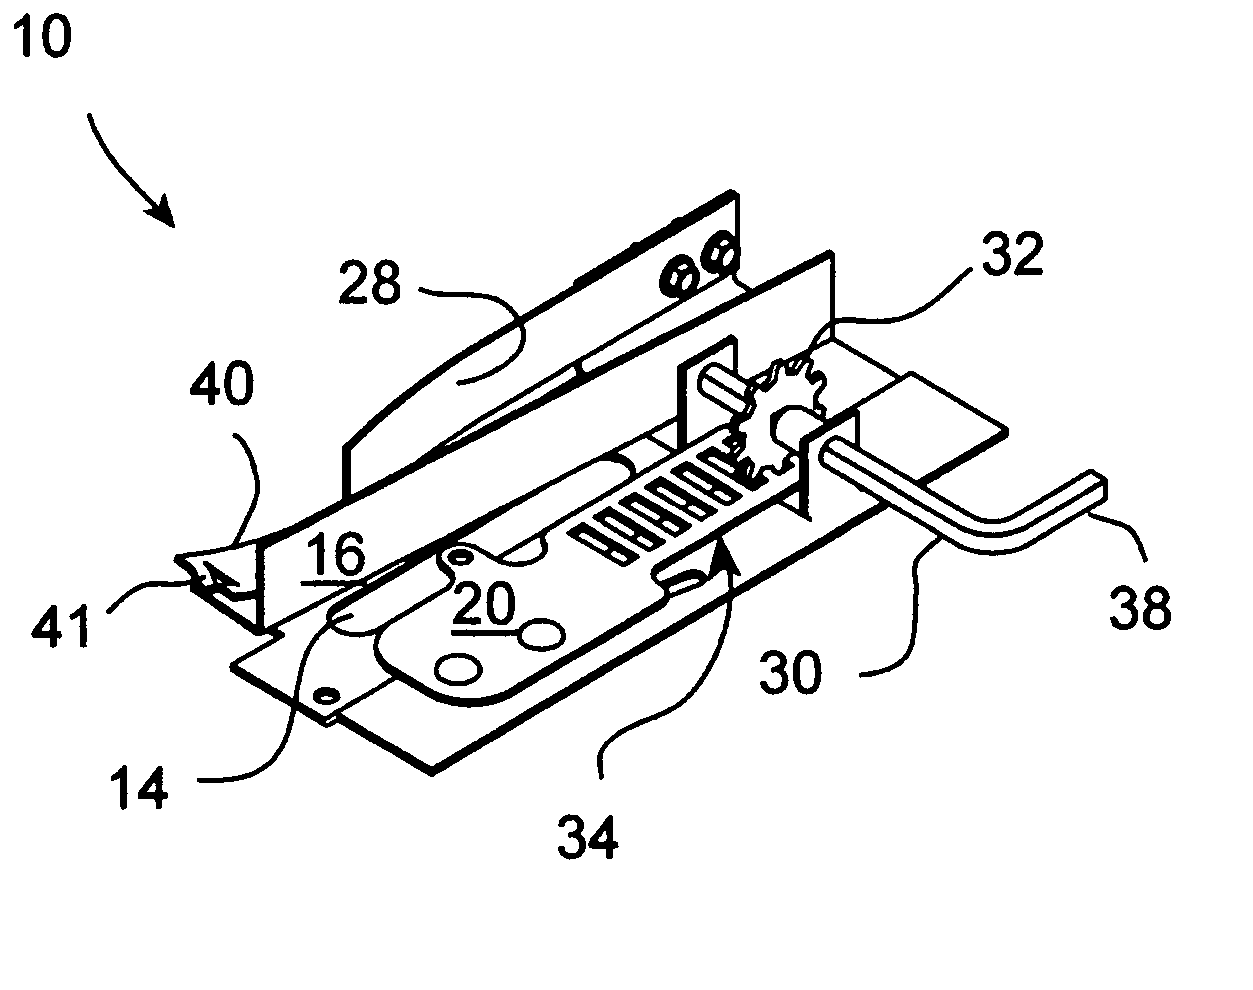 Adjustable primary air supply for wood burning device